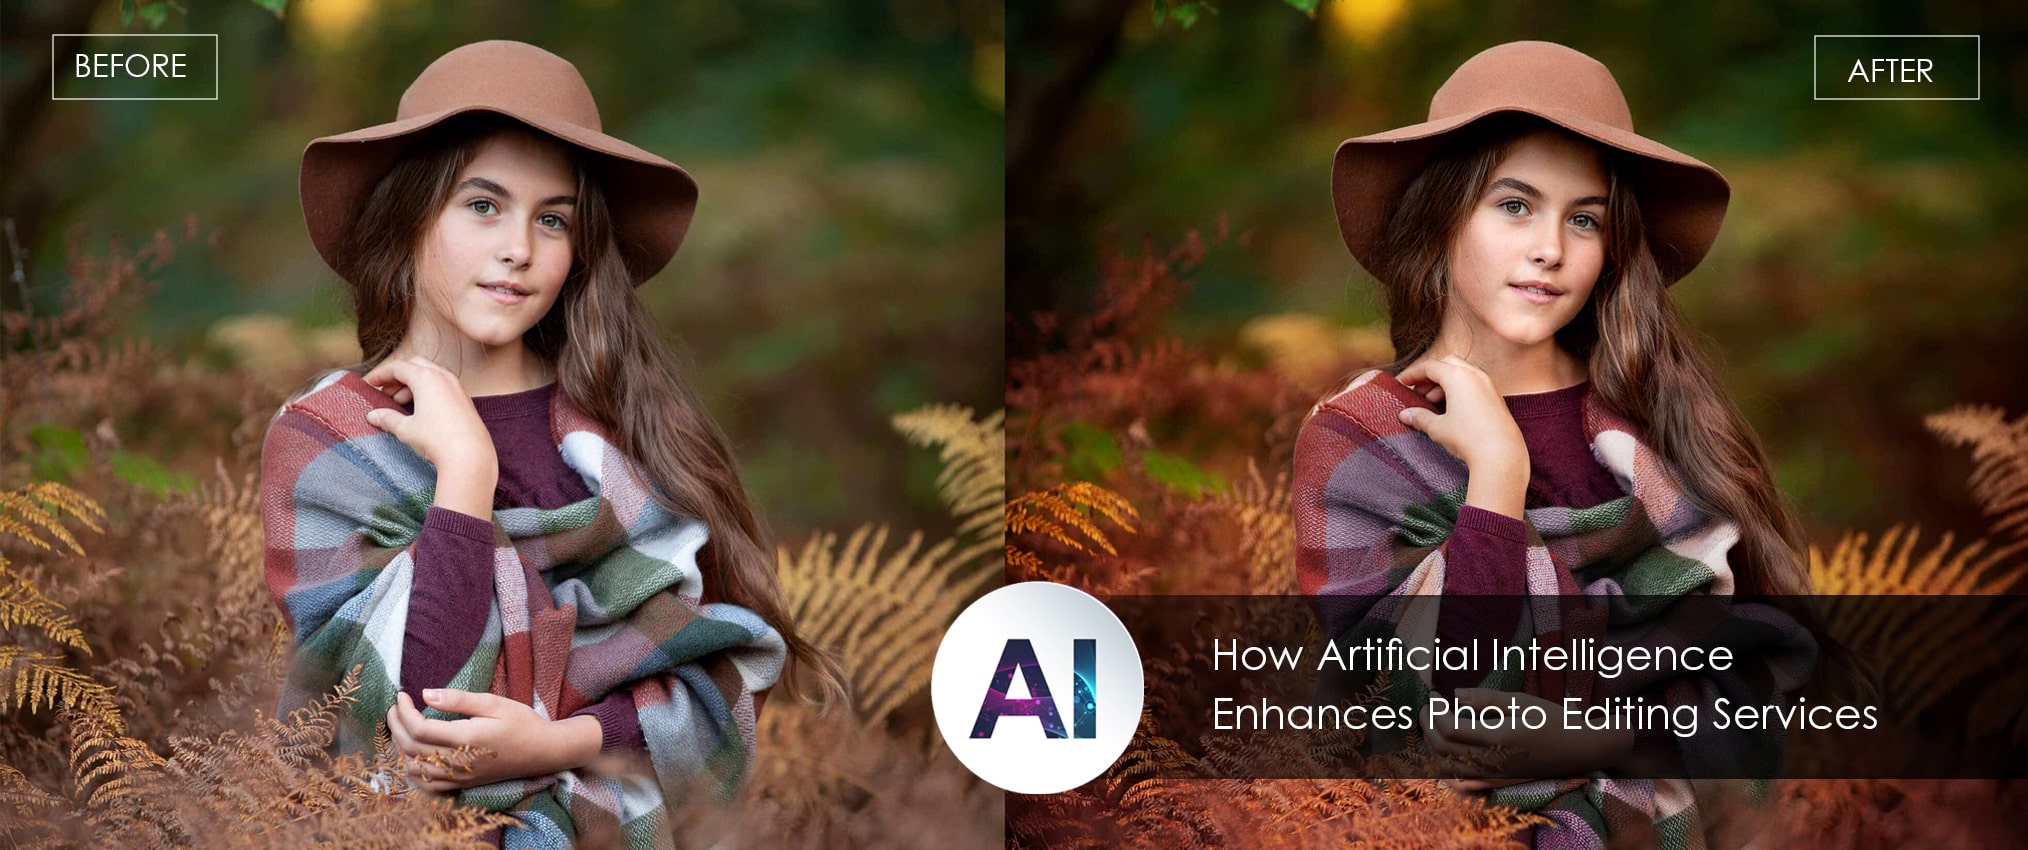 Artificial Intelligence in photo editing